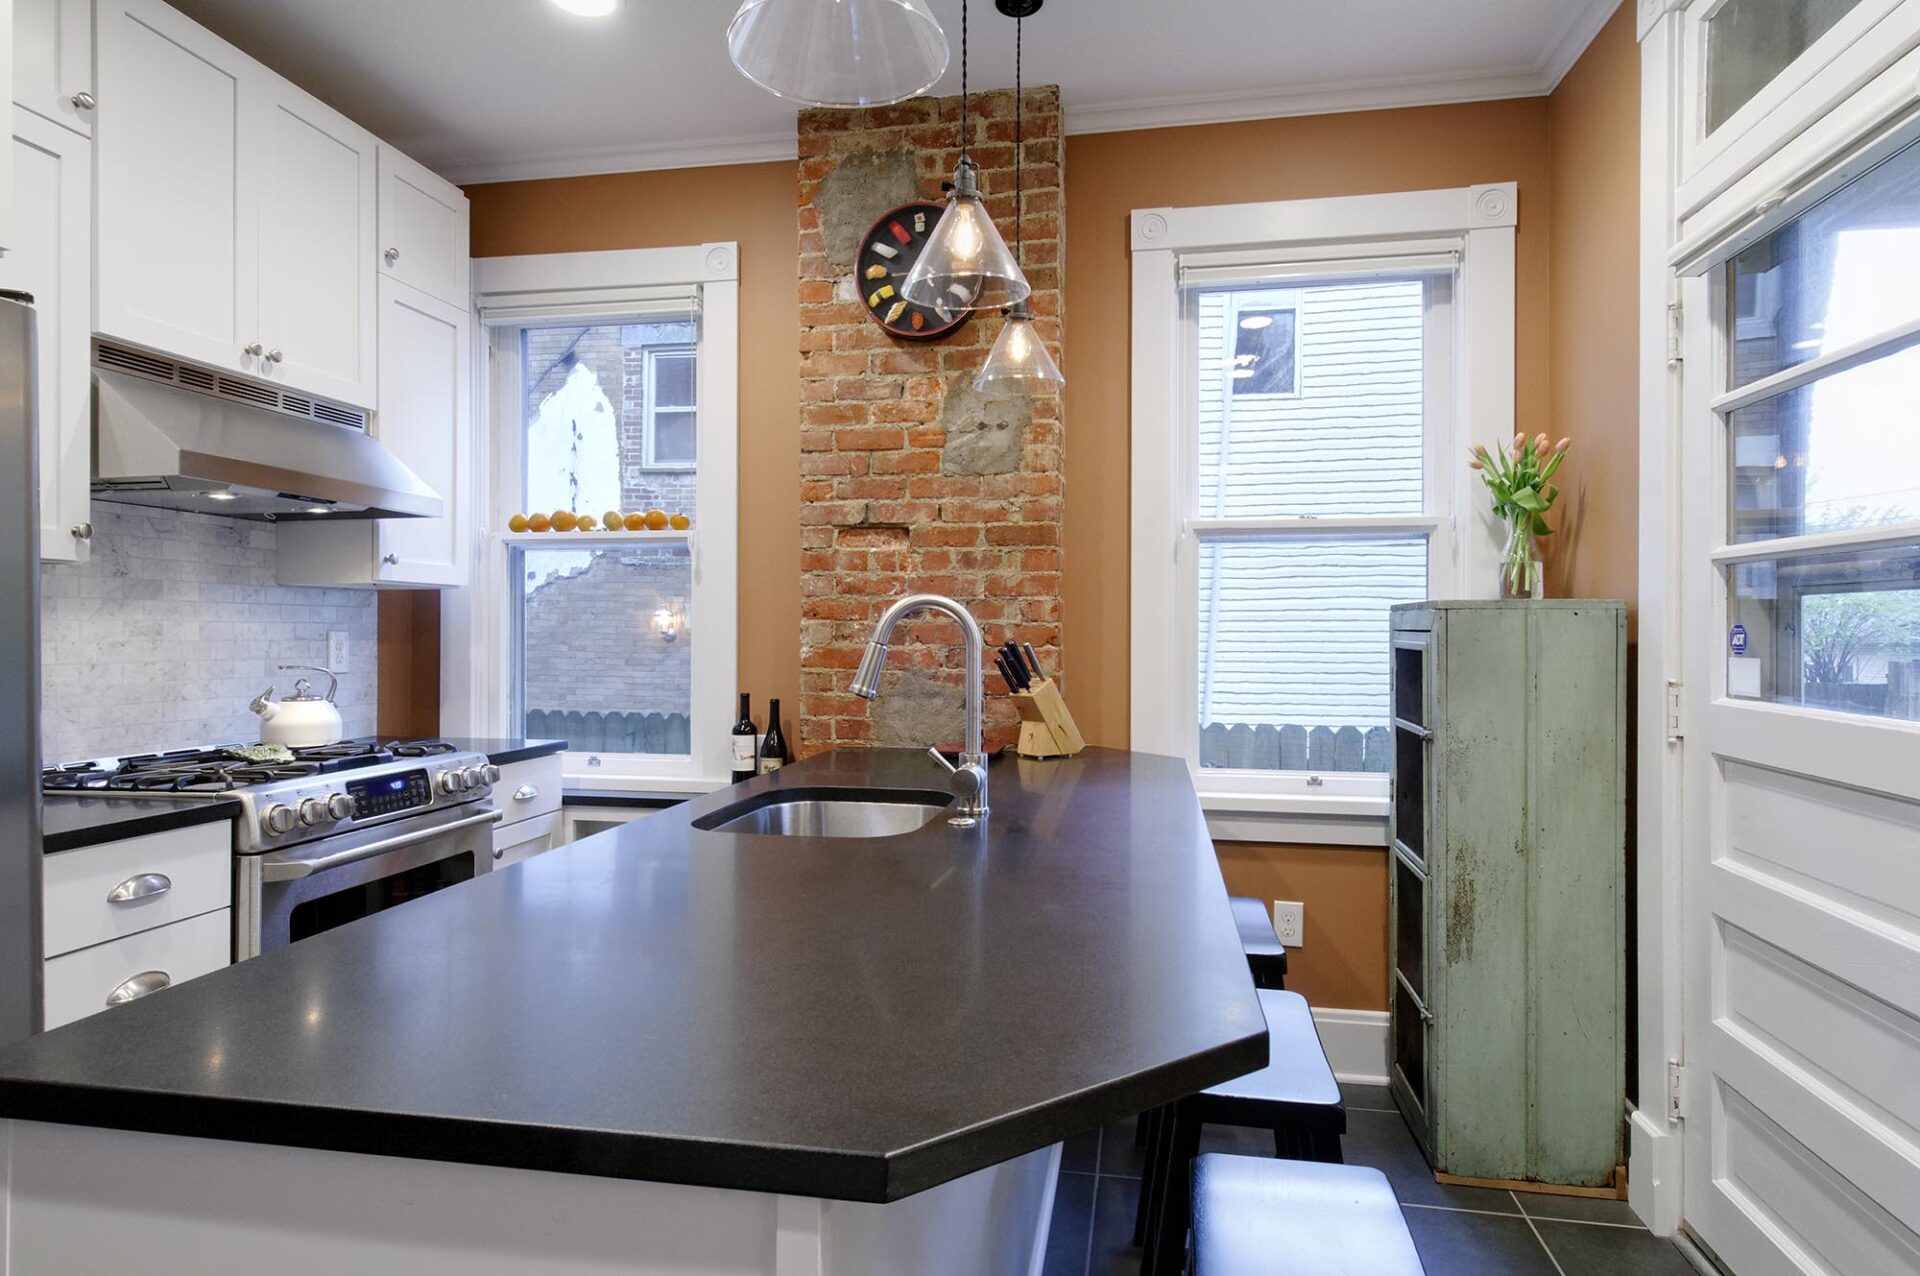 Kitchen, Columbus, Old Towne East, Dave Fox, Remodel, brick, marble tile, white cabinets, small kitchen, floating shelves